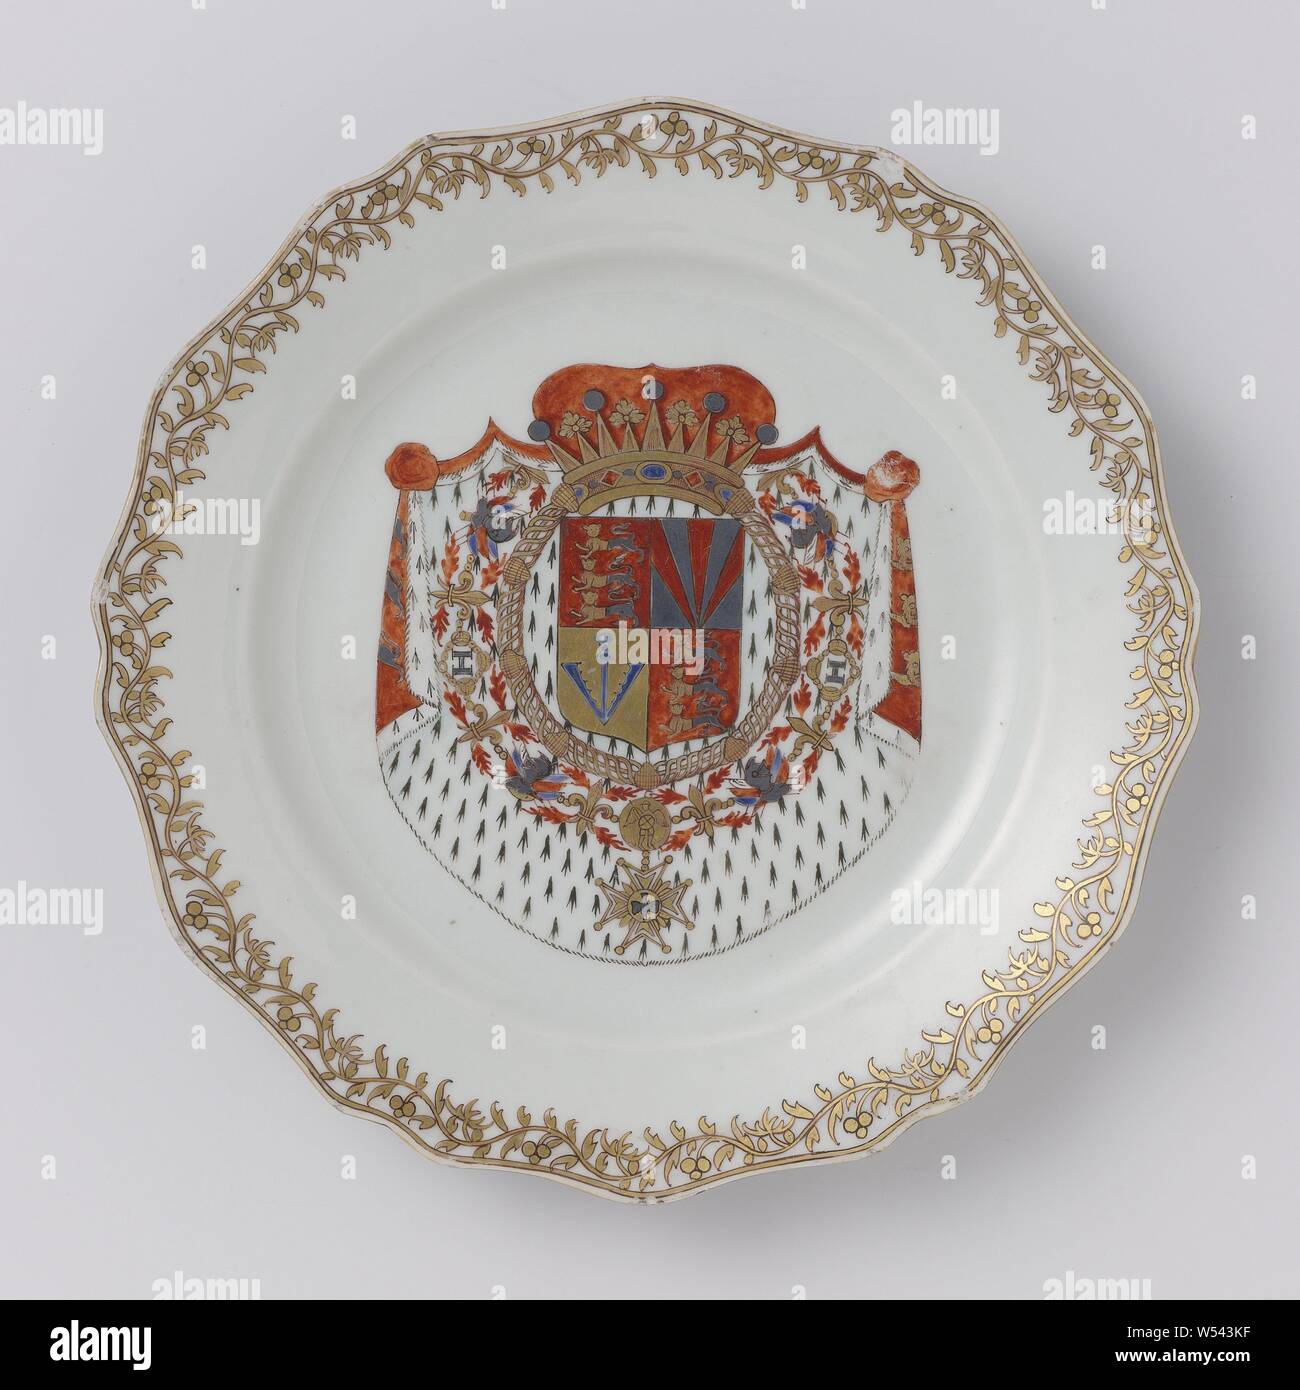 Plate with a crowned coat of arms and a foliate scroll, Porcelain plate with scalloped edge, painted on the glaze in blue, red, black, silver and gold. On the shelf an unidentified, crowned family coat of arms with in 1 and 4 three cats, in 2. three red rays against a silver background and in 3. an anchor against a golden background. The weapon is surrounded by a chain with the French lily, a helmet and the letter H in a medallion. The cover consists of an ermine coat. A continuous leaf vine on the edge. A few chips in the edge. Weapon porcelain with enamel colors., anonymous, China, c. 1740 Stock Photo